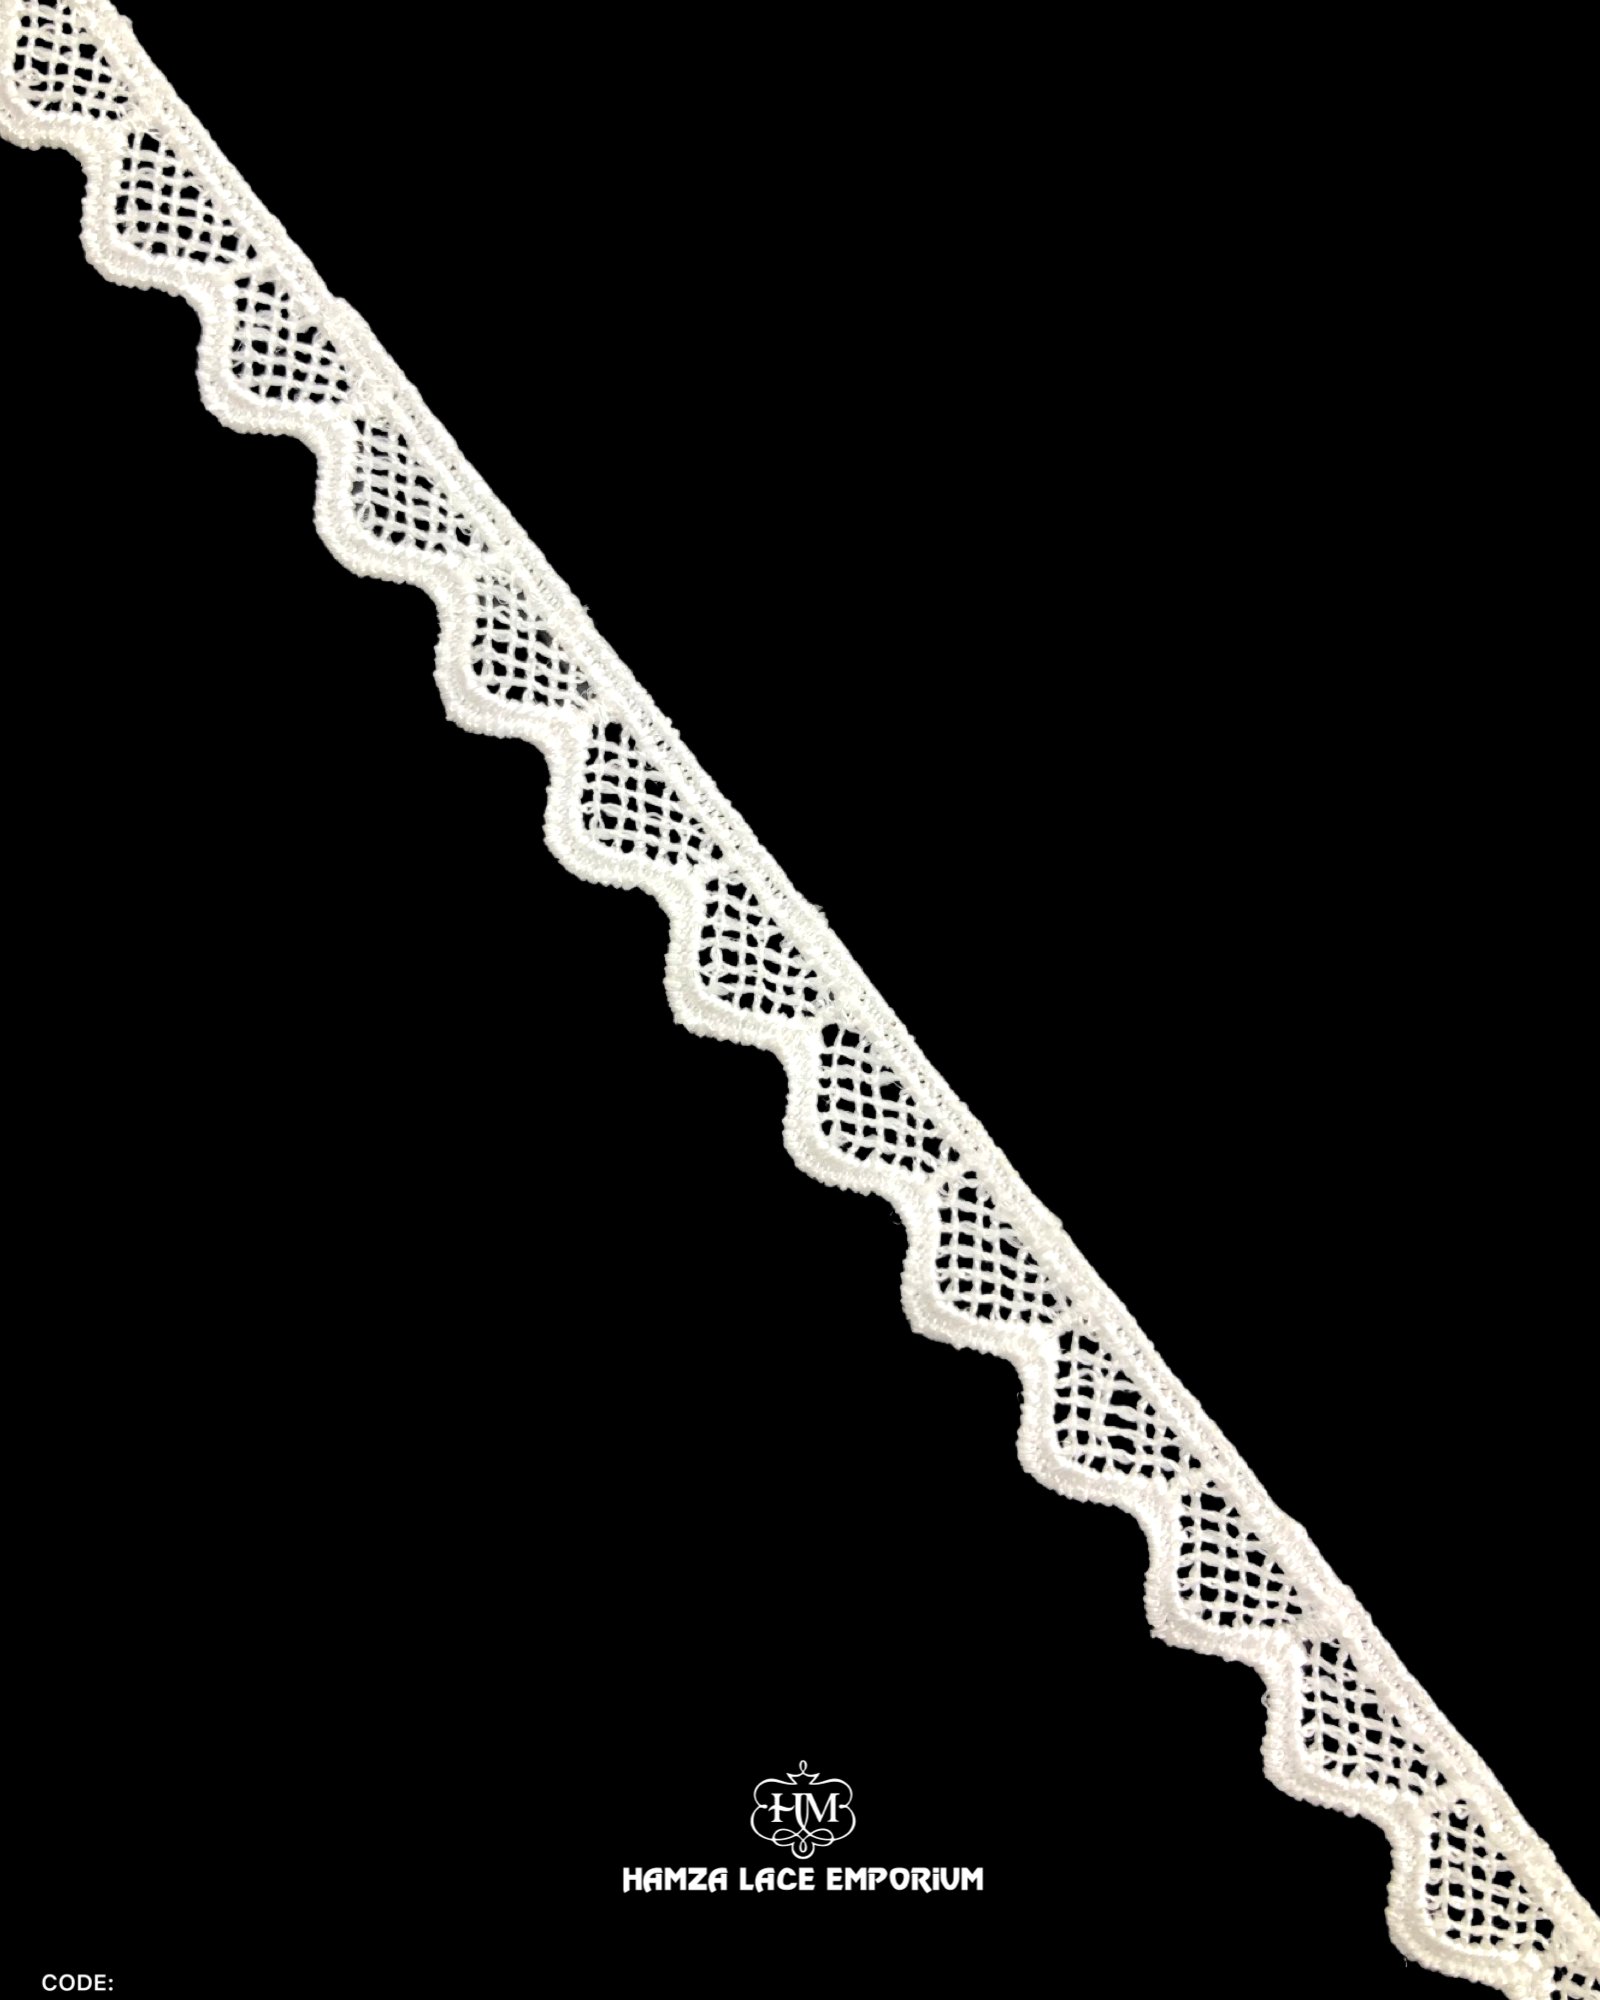 A 'Edging Shuttle Lace 70732' is on a black piece of fiber and the brand name "Hamza Lace' at the bottom